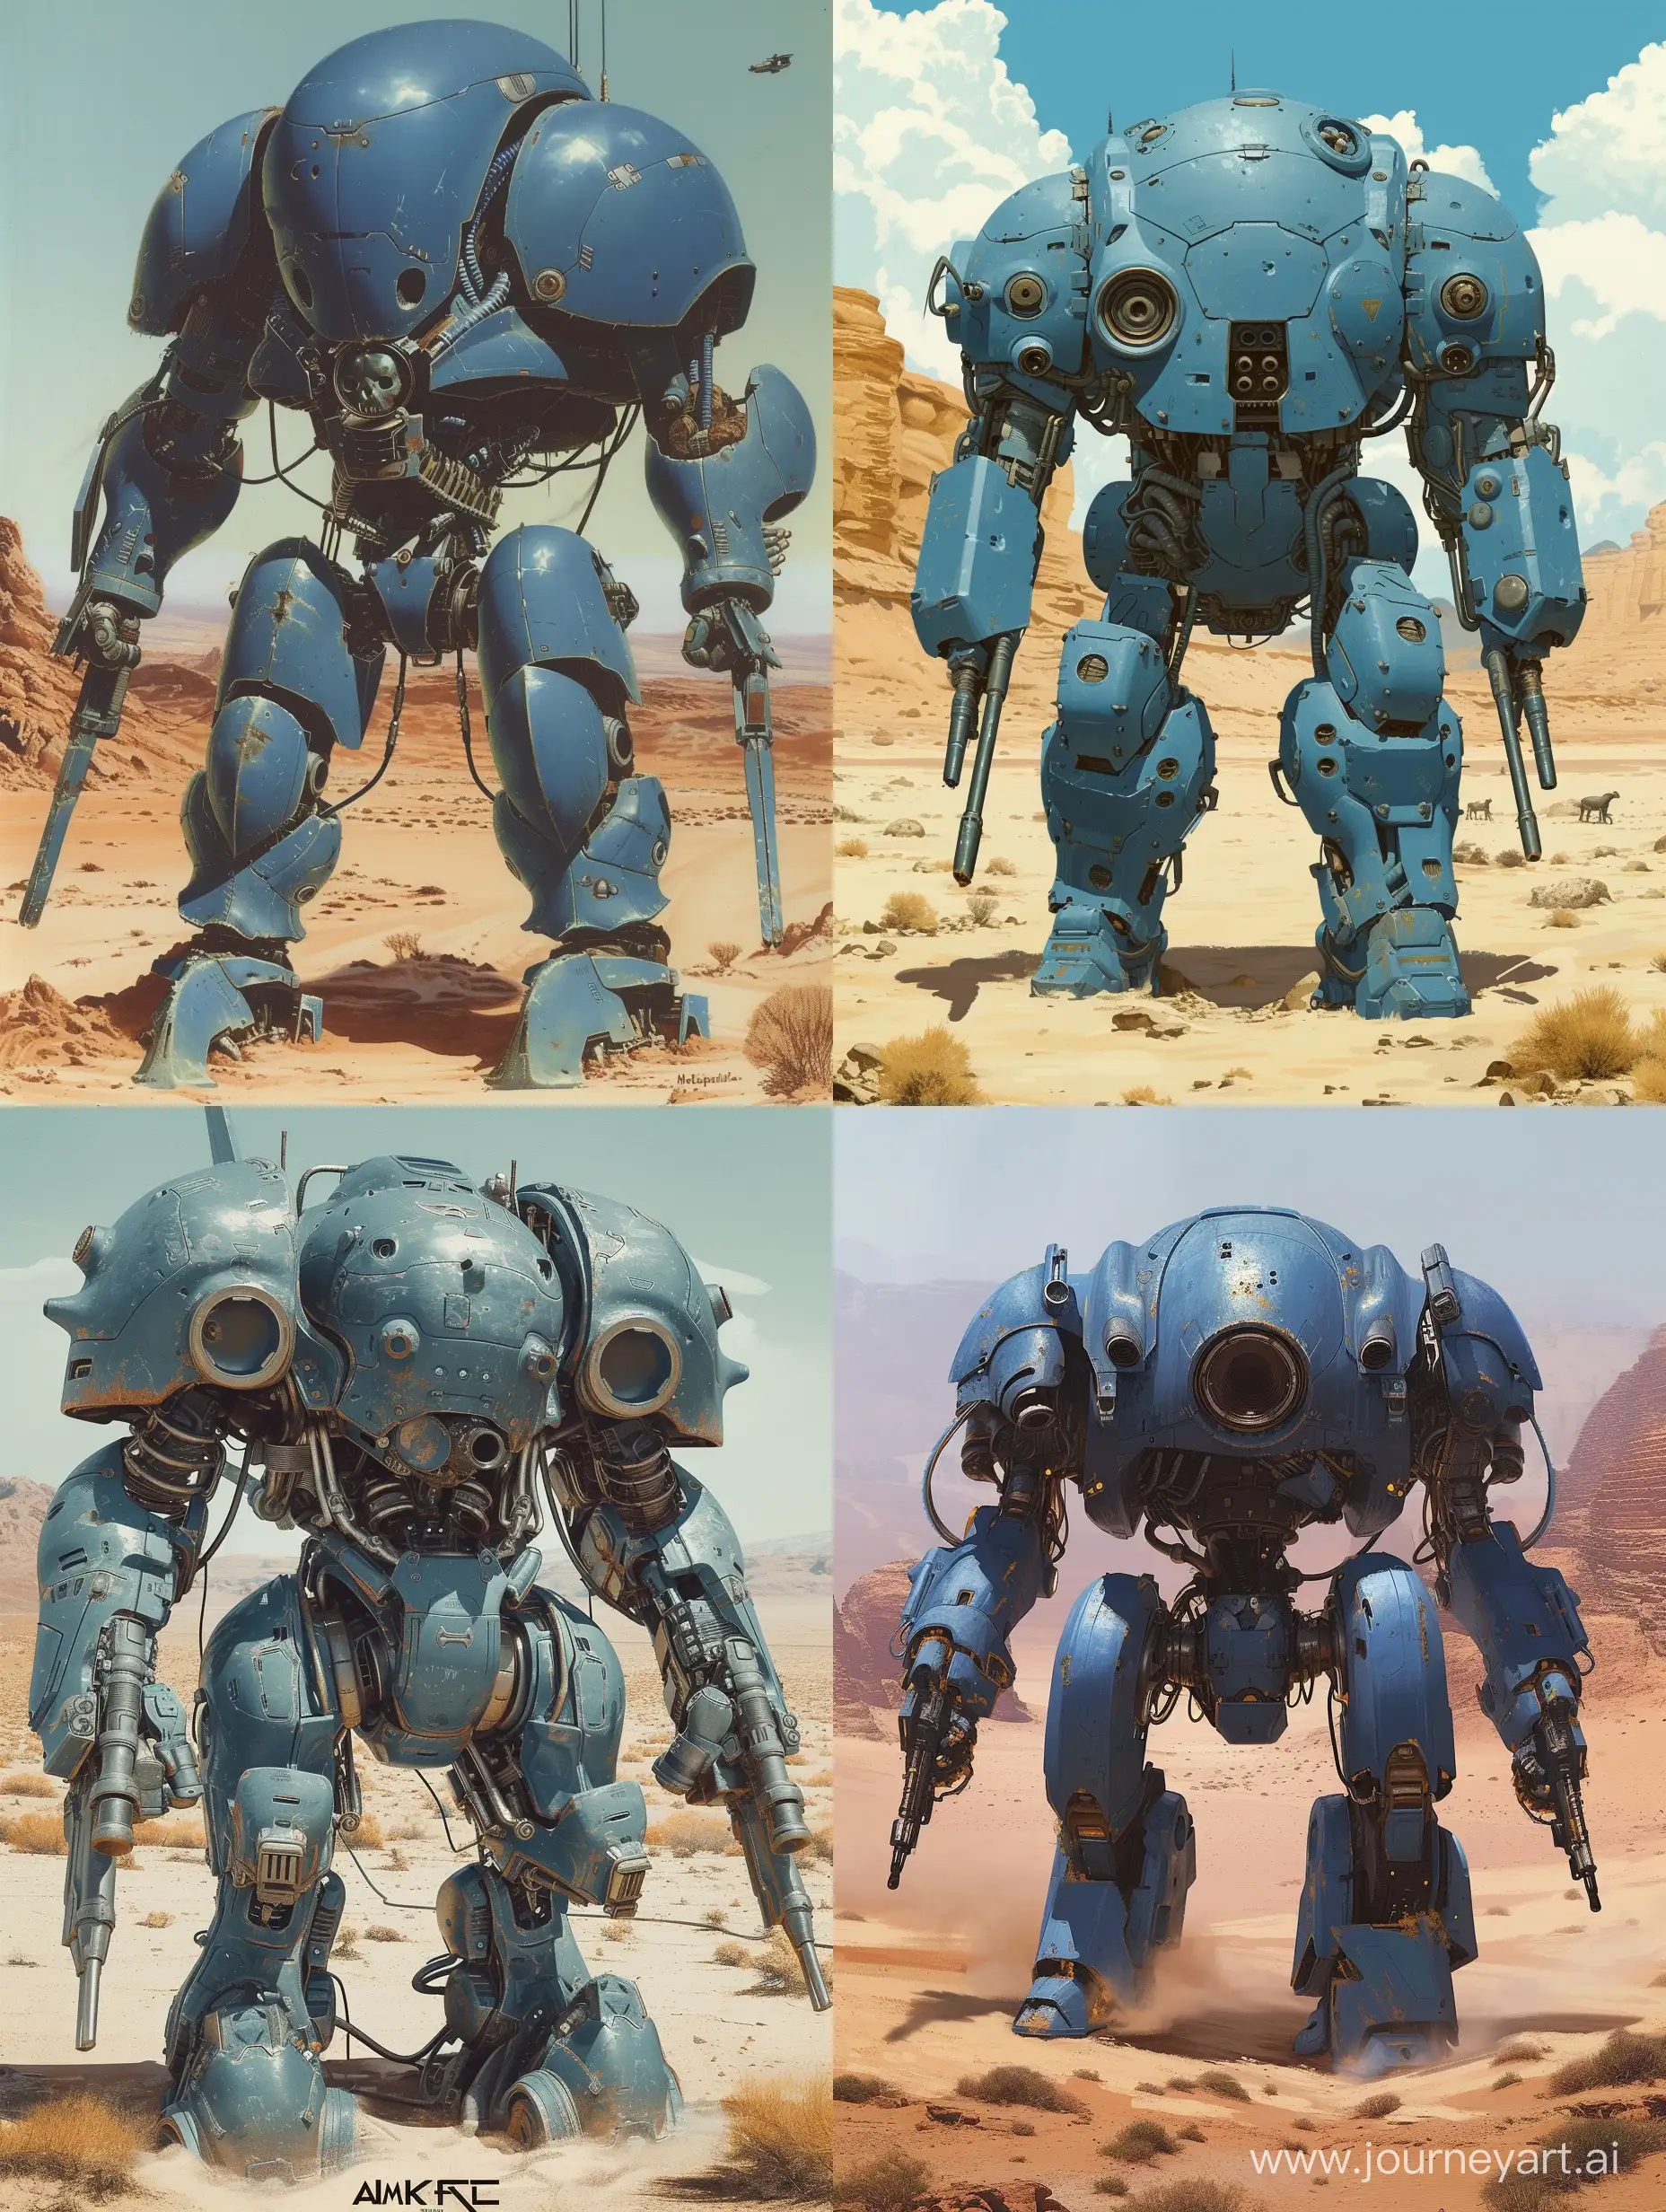 Concept art of a big armored headless blue mech suit with a central cockpit and weapon arms in a desert in Ralph McQuarrie style. in Retro Science Fiction Art style. in color. similar to the AMP suit from avatar.